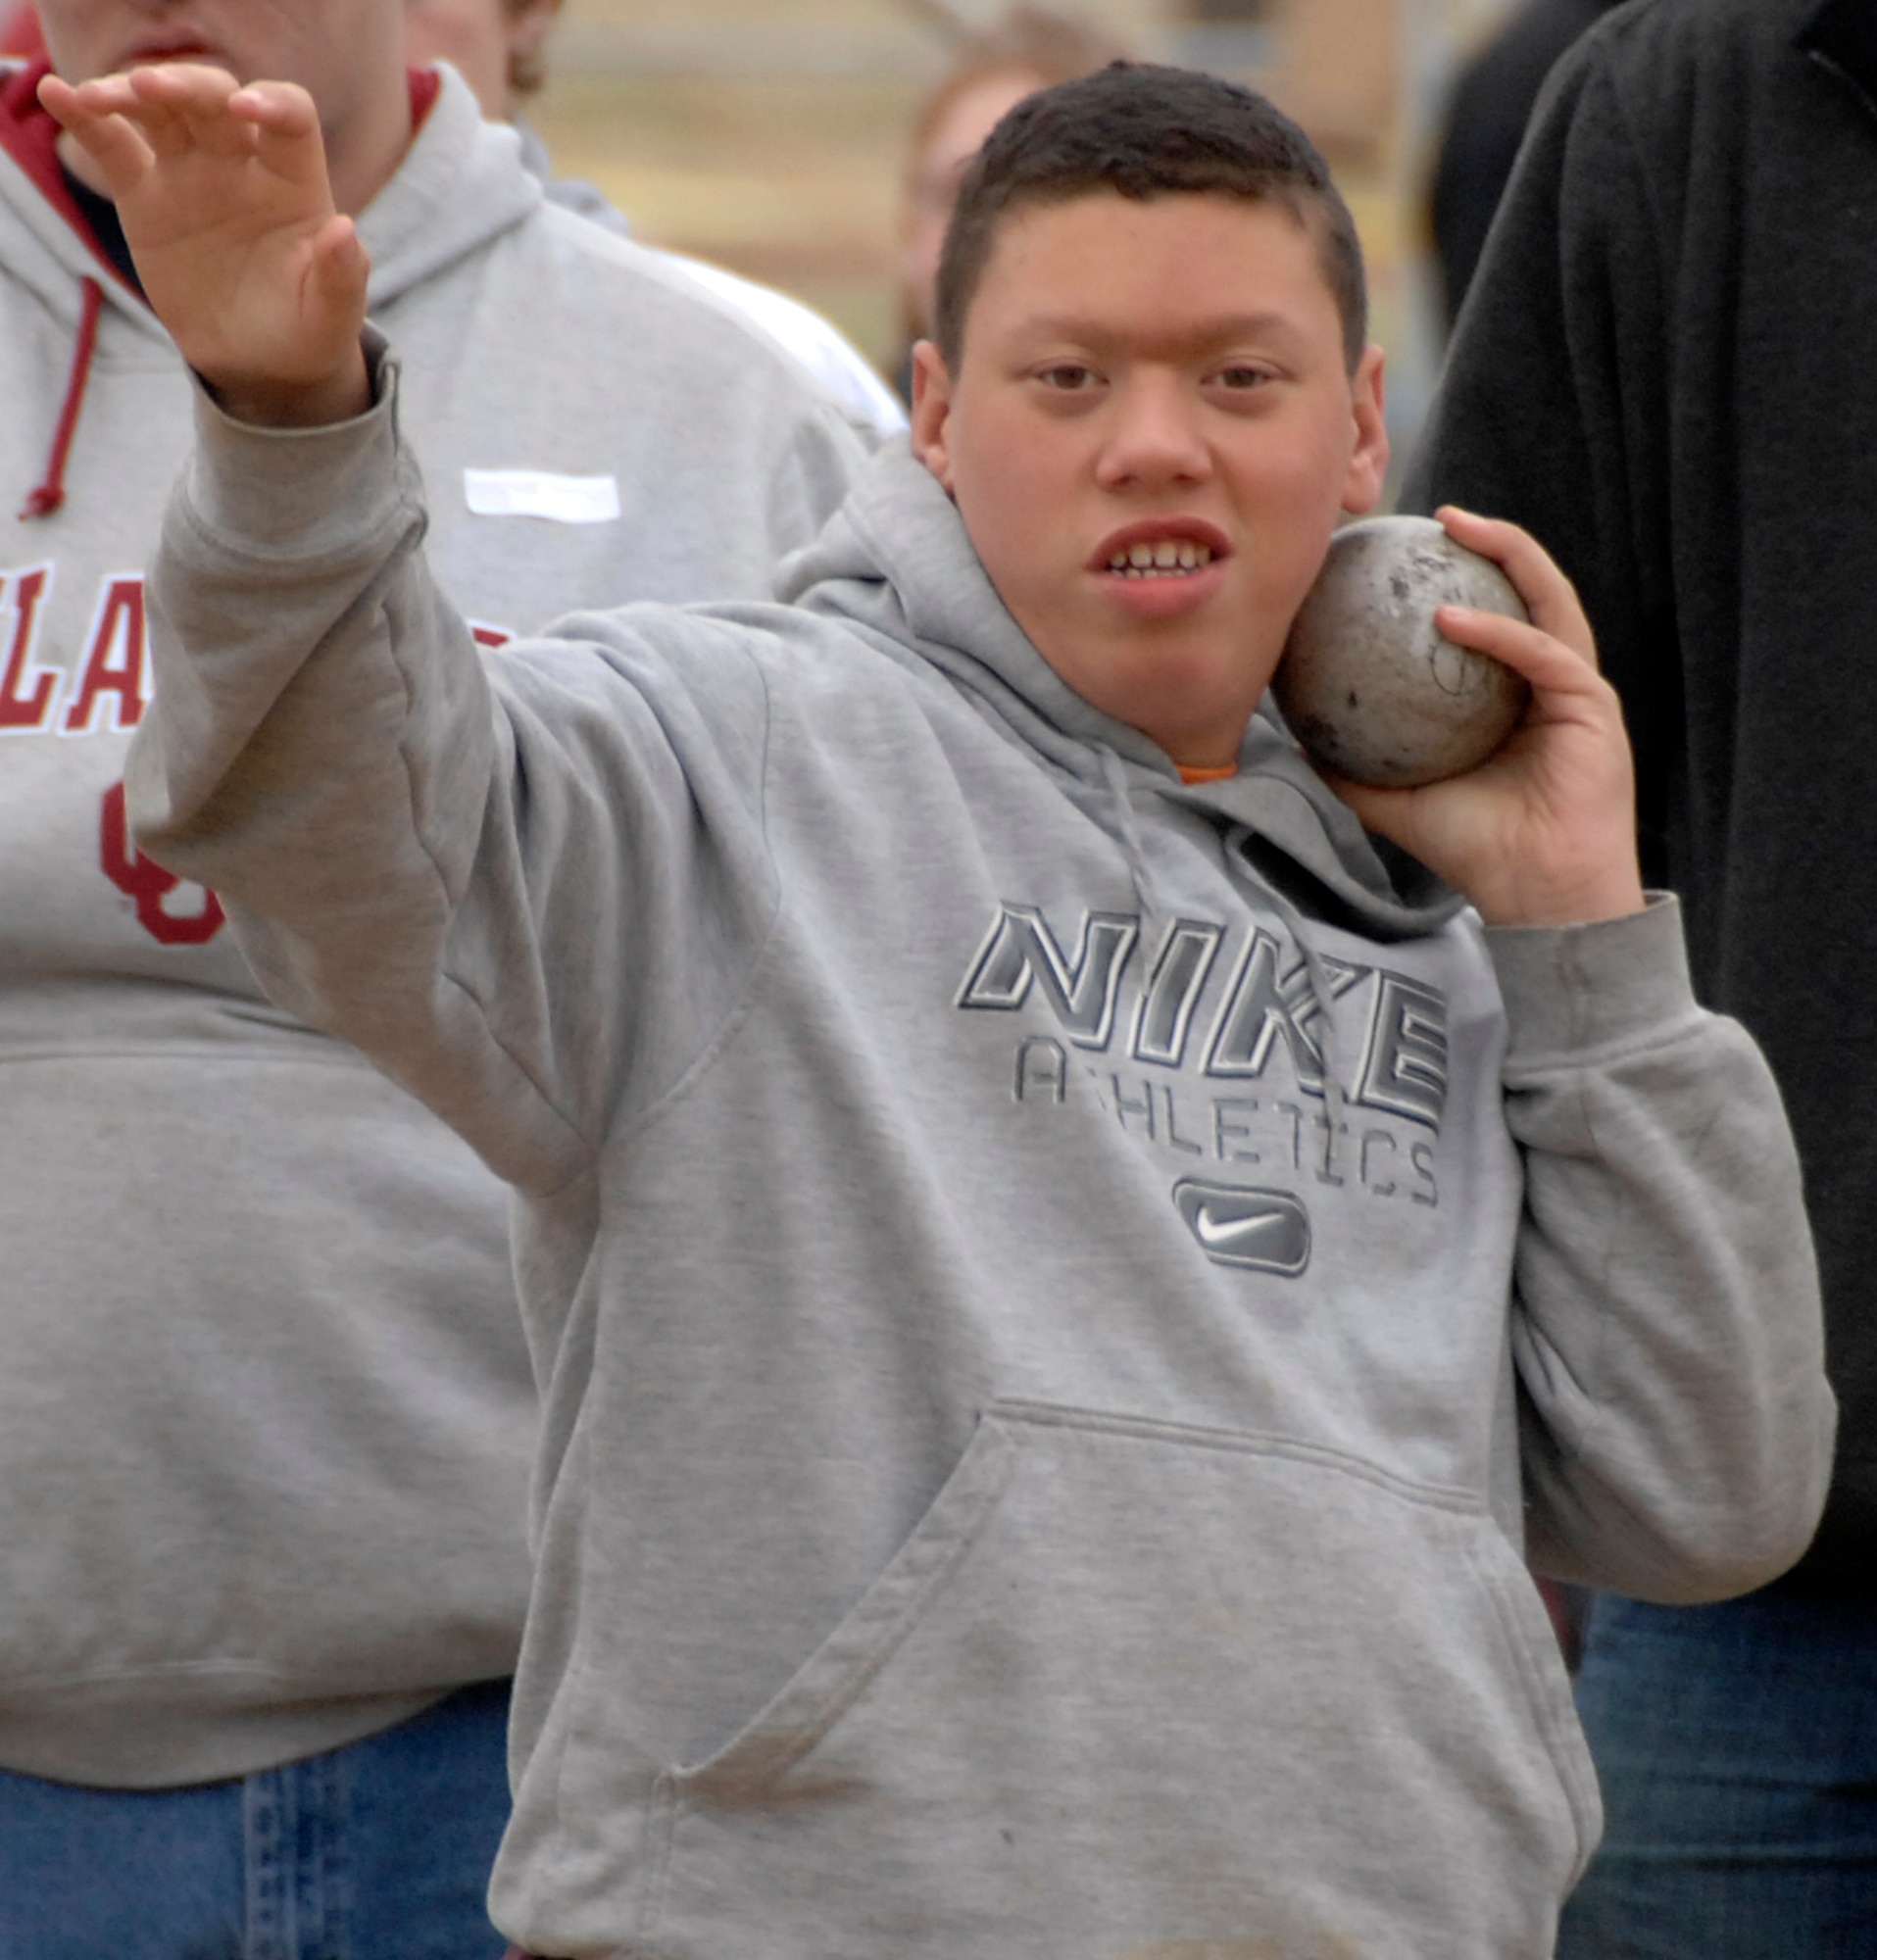 A Special Olympian competes in the shot put event at the 2009 Cherokee Strip Area 6 Track and Field Athletics meet held at Vance March 26. In the 40-year history of the Area 6 Special Olympics, 20 of the competitions have been held at Vance. (U.S. Air Force photo by Terry Wasson)